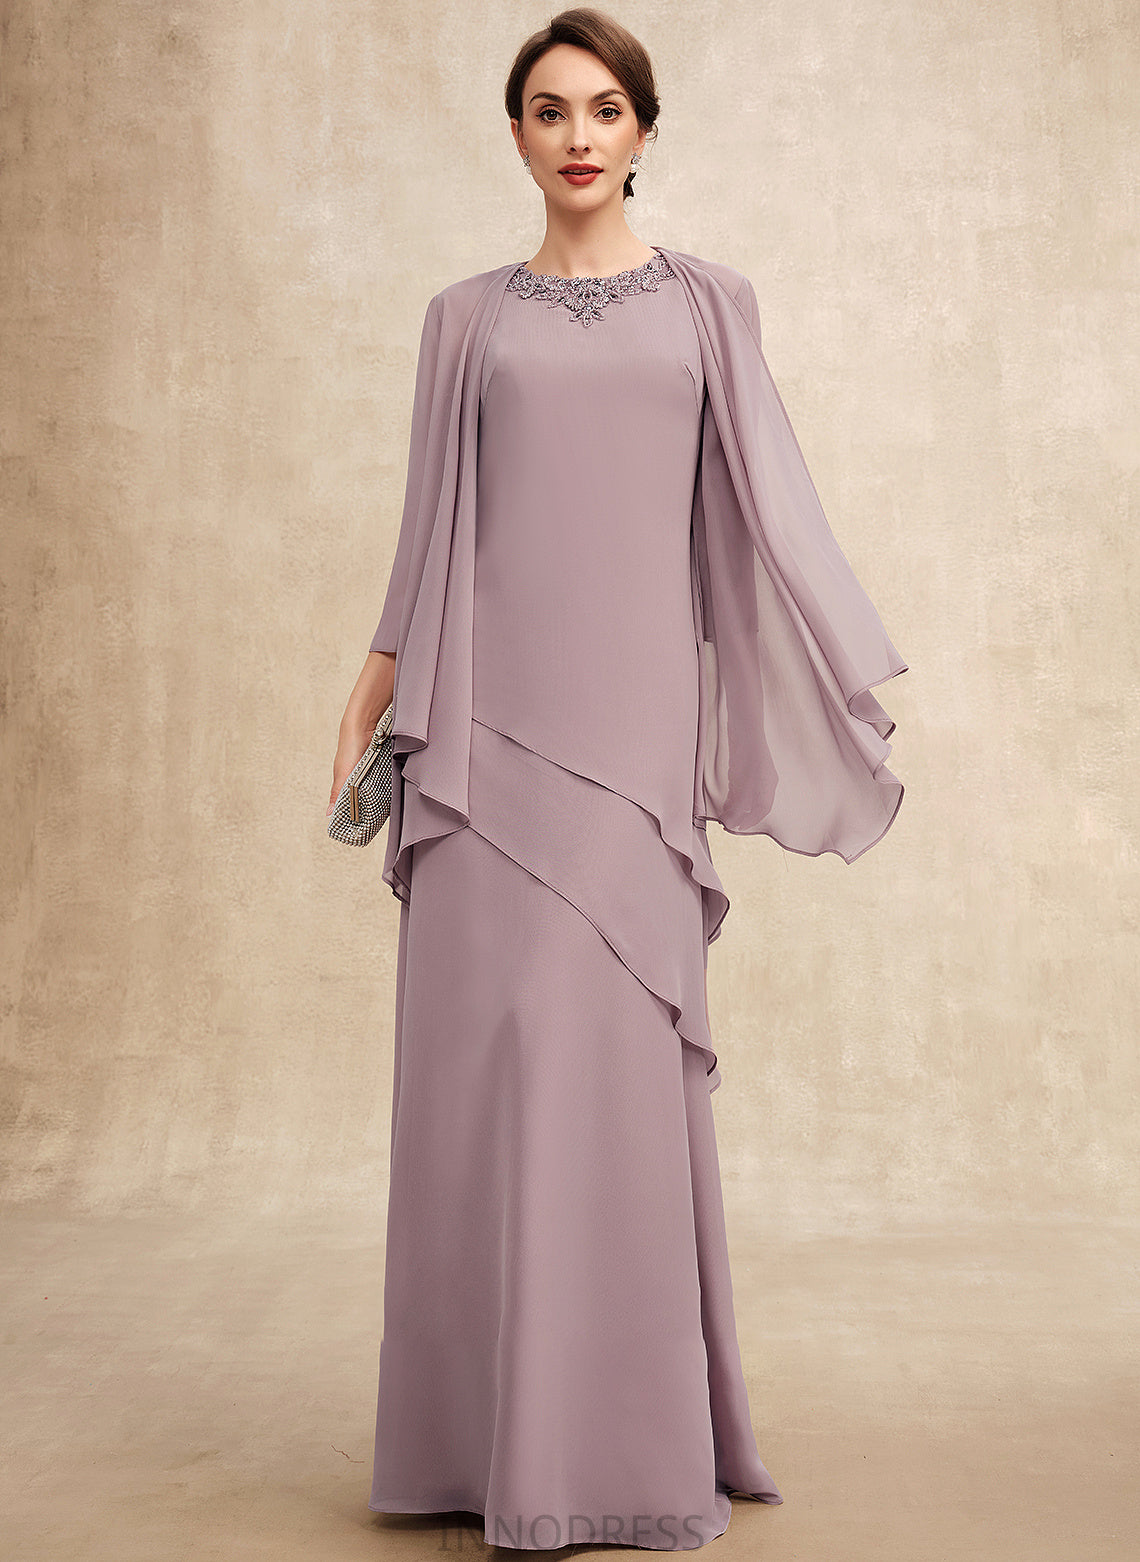 Scoop Neck Beading Chiffon A-Line Dress of Mother of the Bride Dresses With Bride Mother the Tiffany Floor-Length